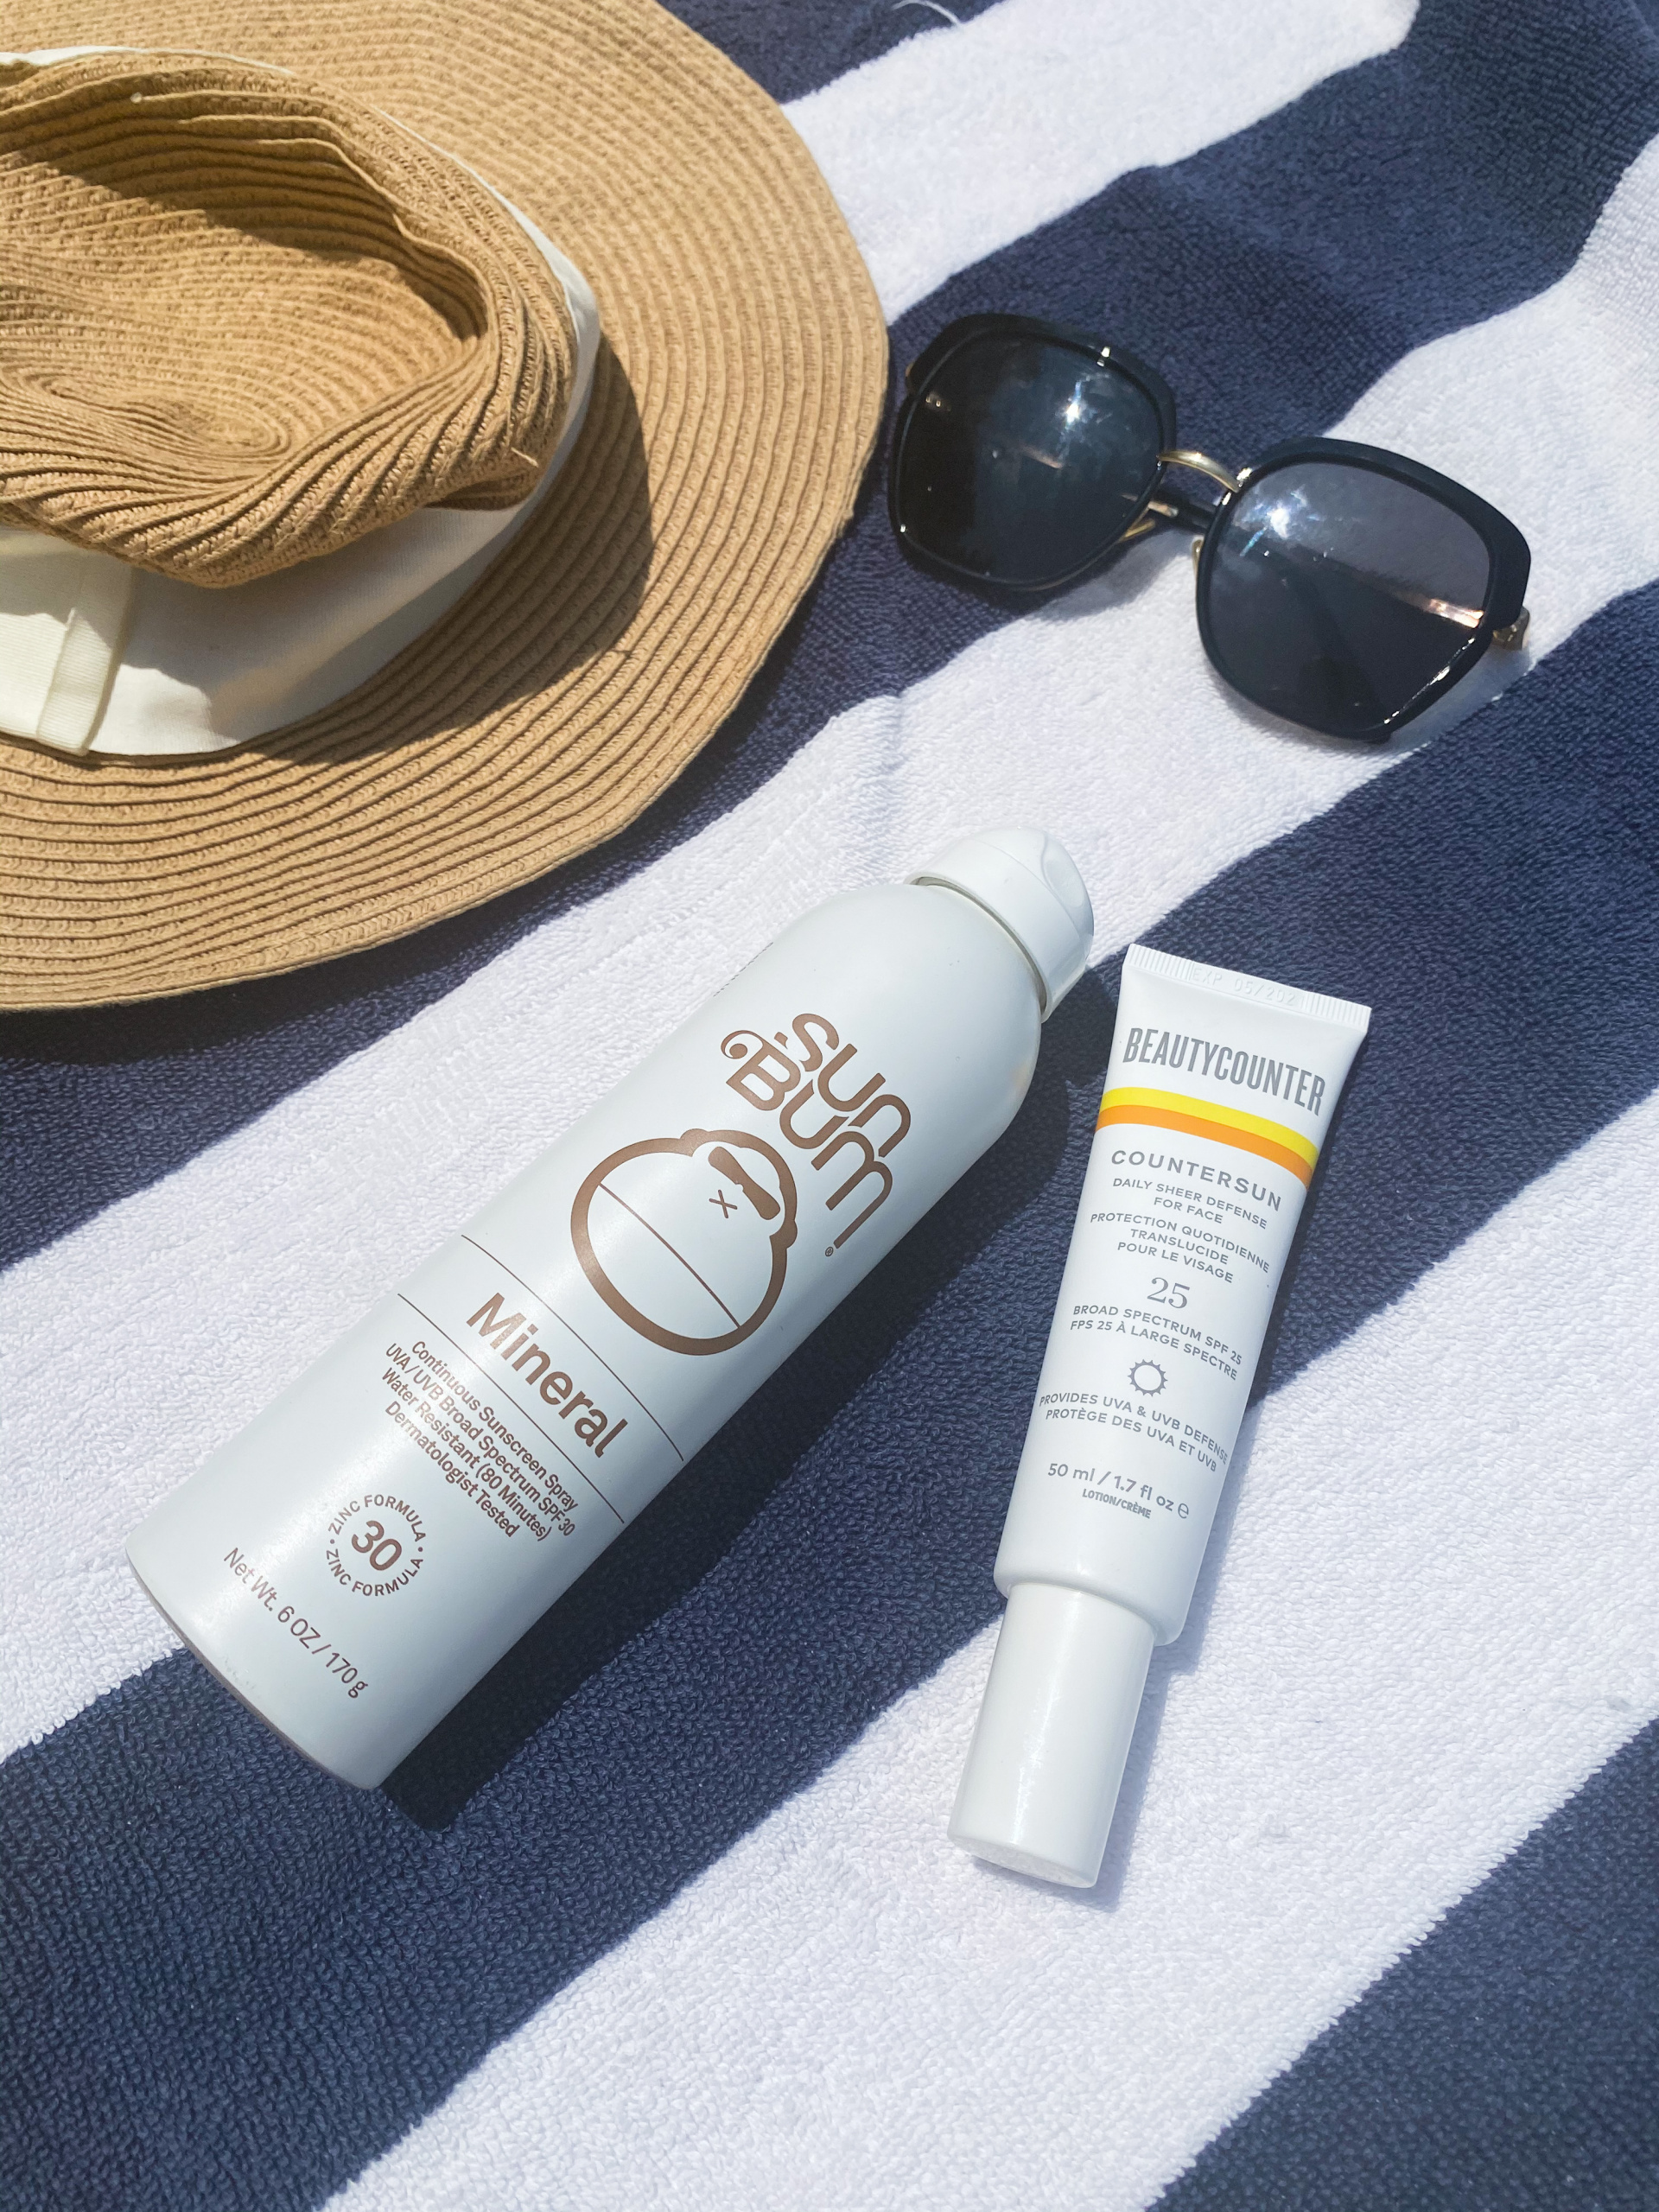 Mineral based sunscreen that’s clean and safe, spf for your face, best sunscreen, tips for staying healthy this summer